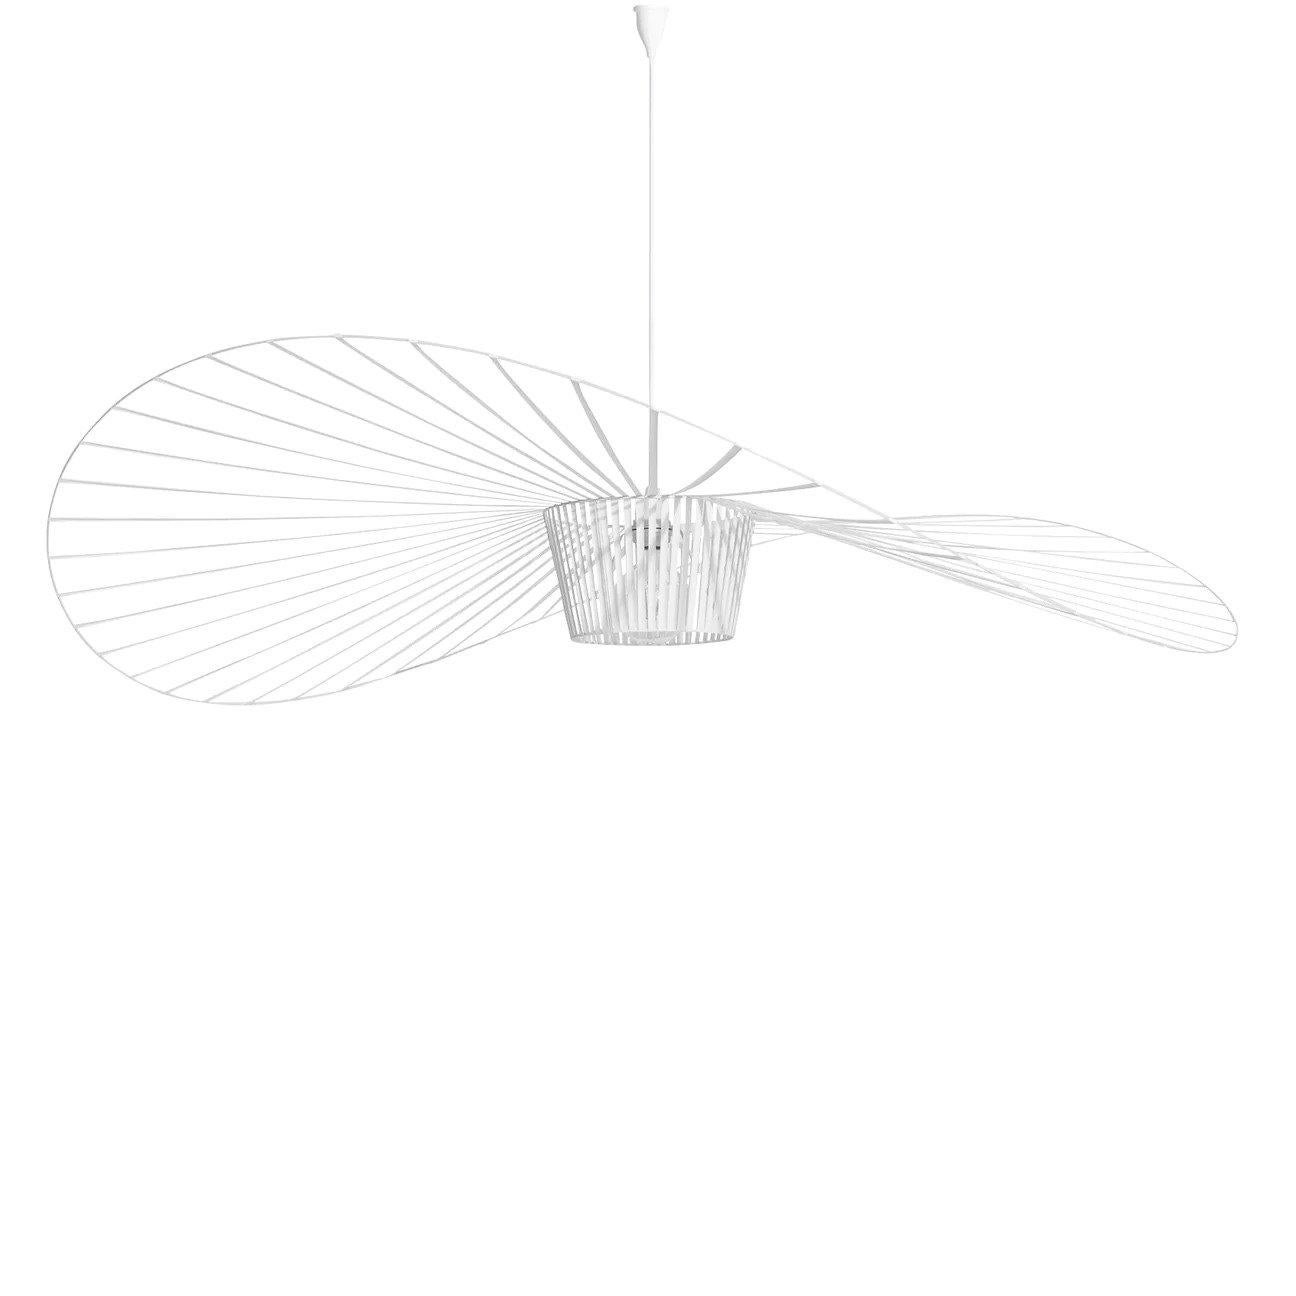 Vertigo ceiling light designed in France by Constance Guisset. The Vertigo has an ultralight fiberglass structure, stretched with polyurethane ribbons. Available in two sizes 55